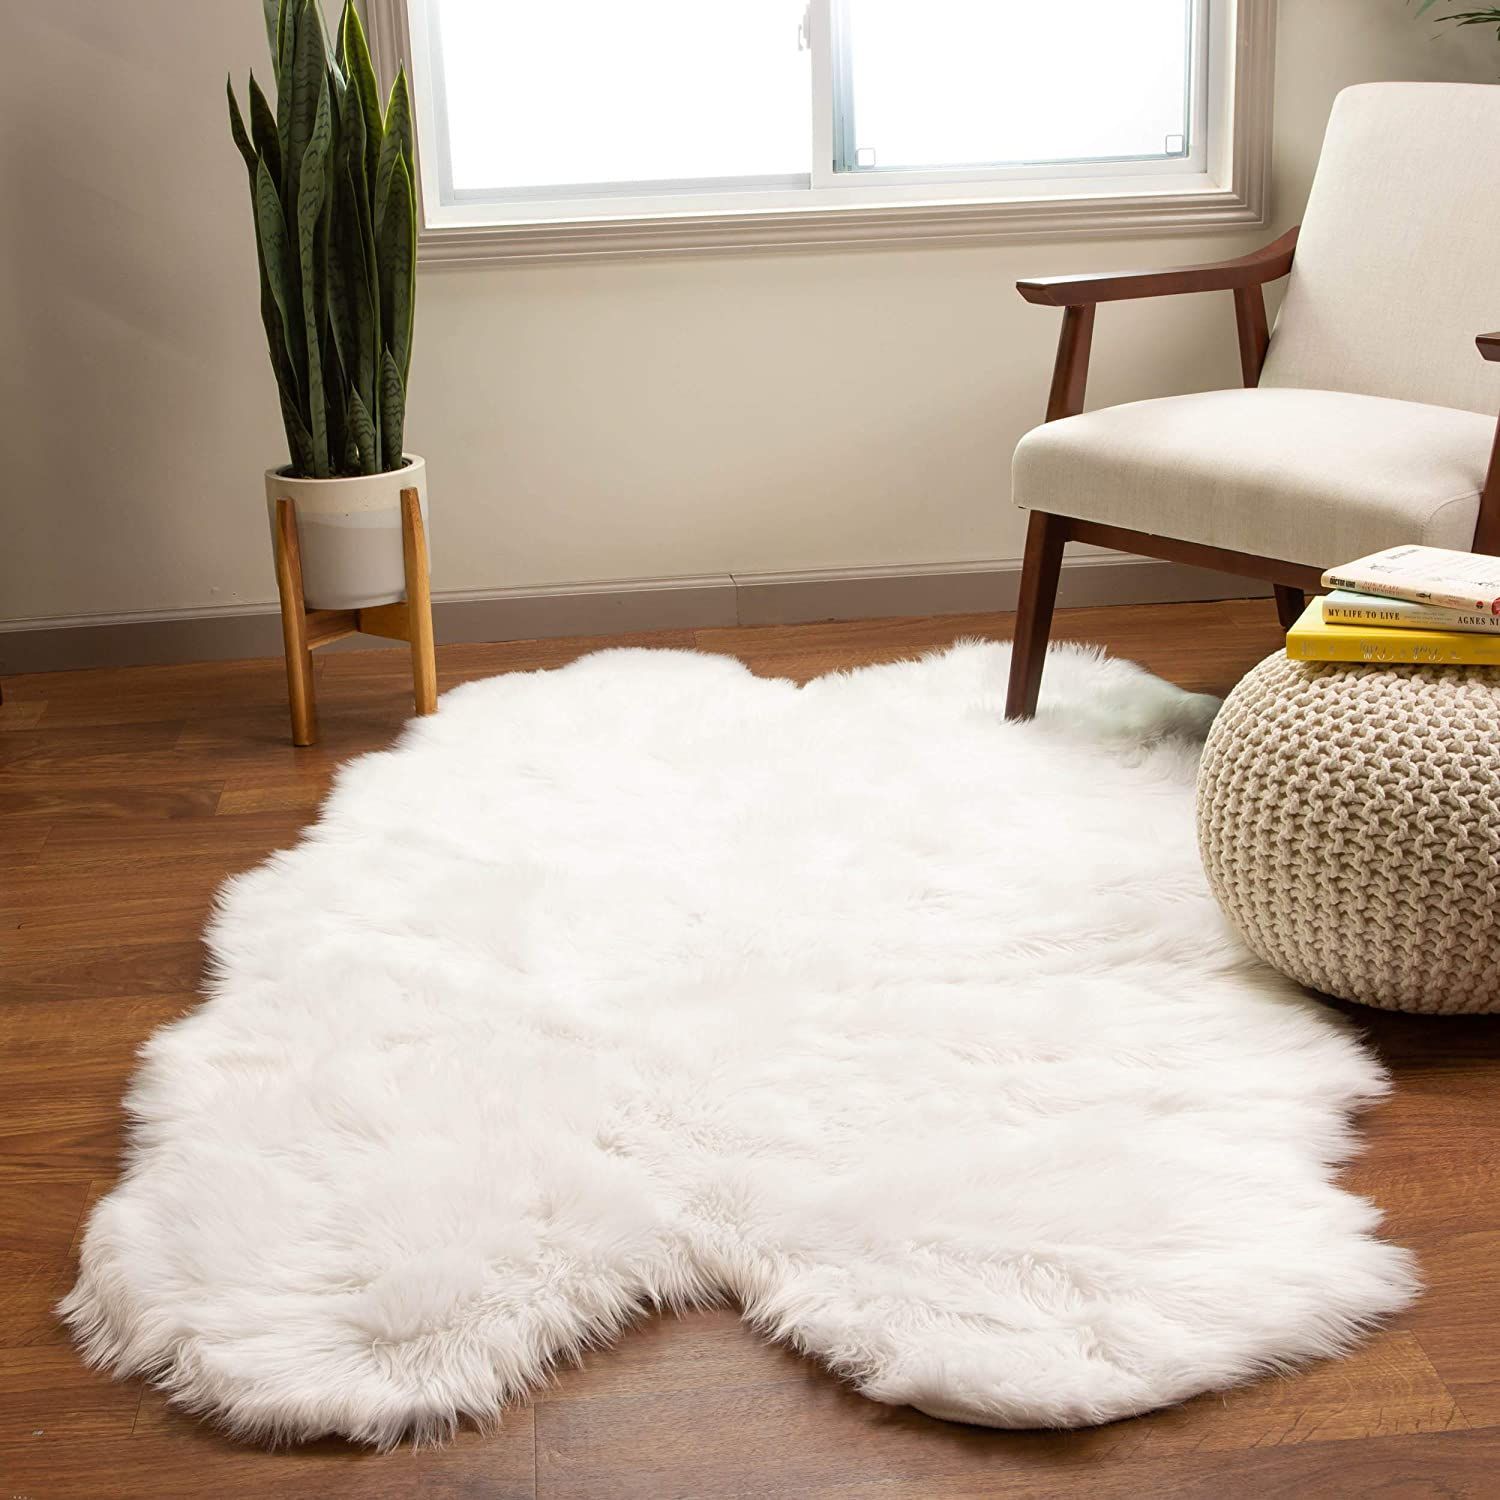 Soft Area Rugs To Make Your Home Cozy, Big Fluffy Rugs For Living Room